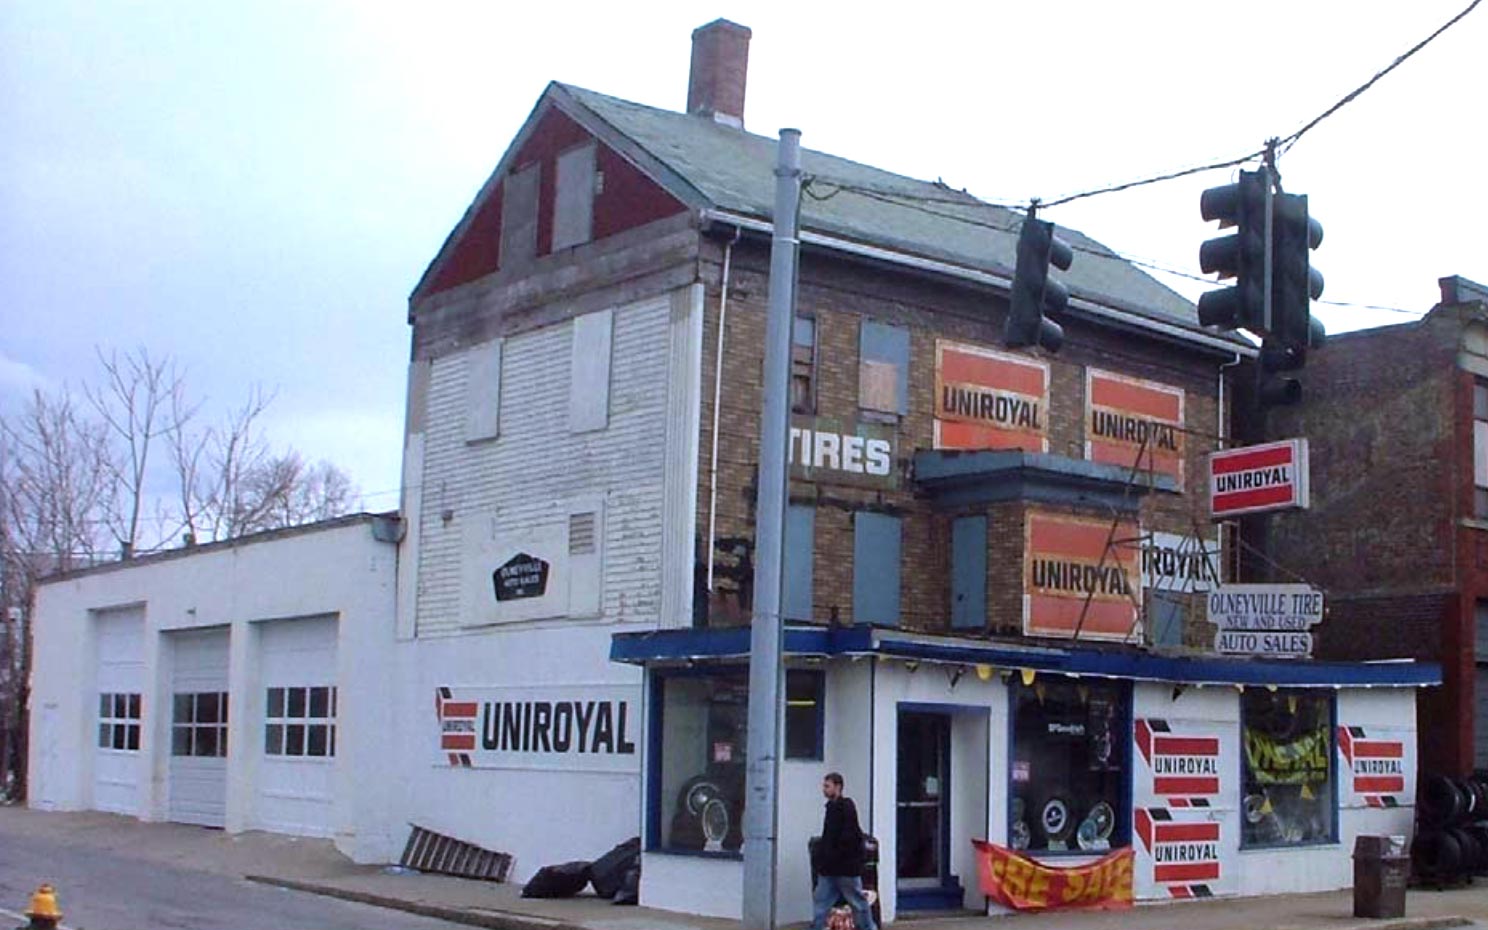 A two and a half story house with a shallow one story streetfront. For most of its life it was covered in signs for tires and tire brands Uniroyal and B.F. Goodrich.